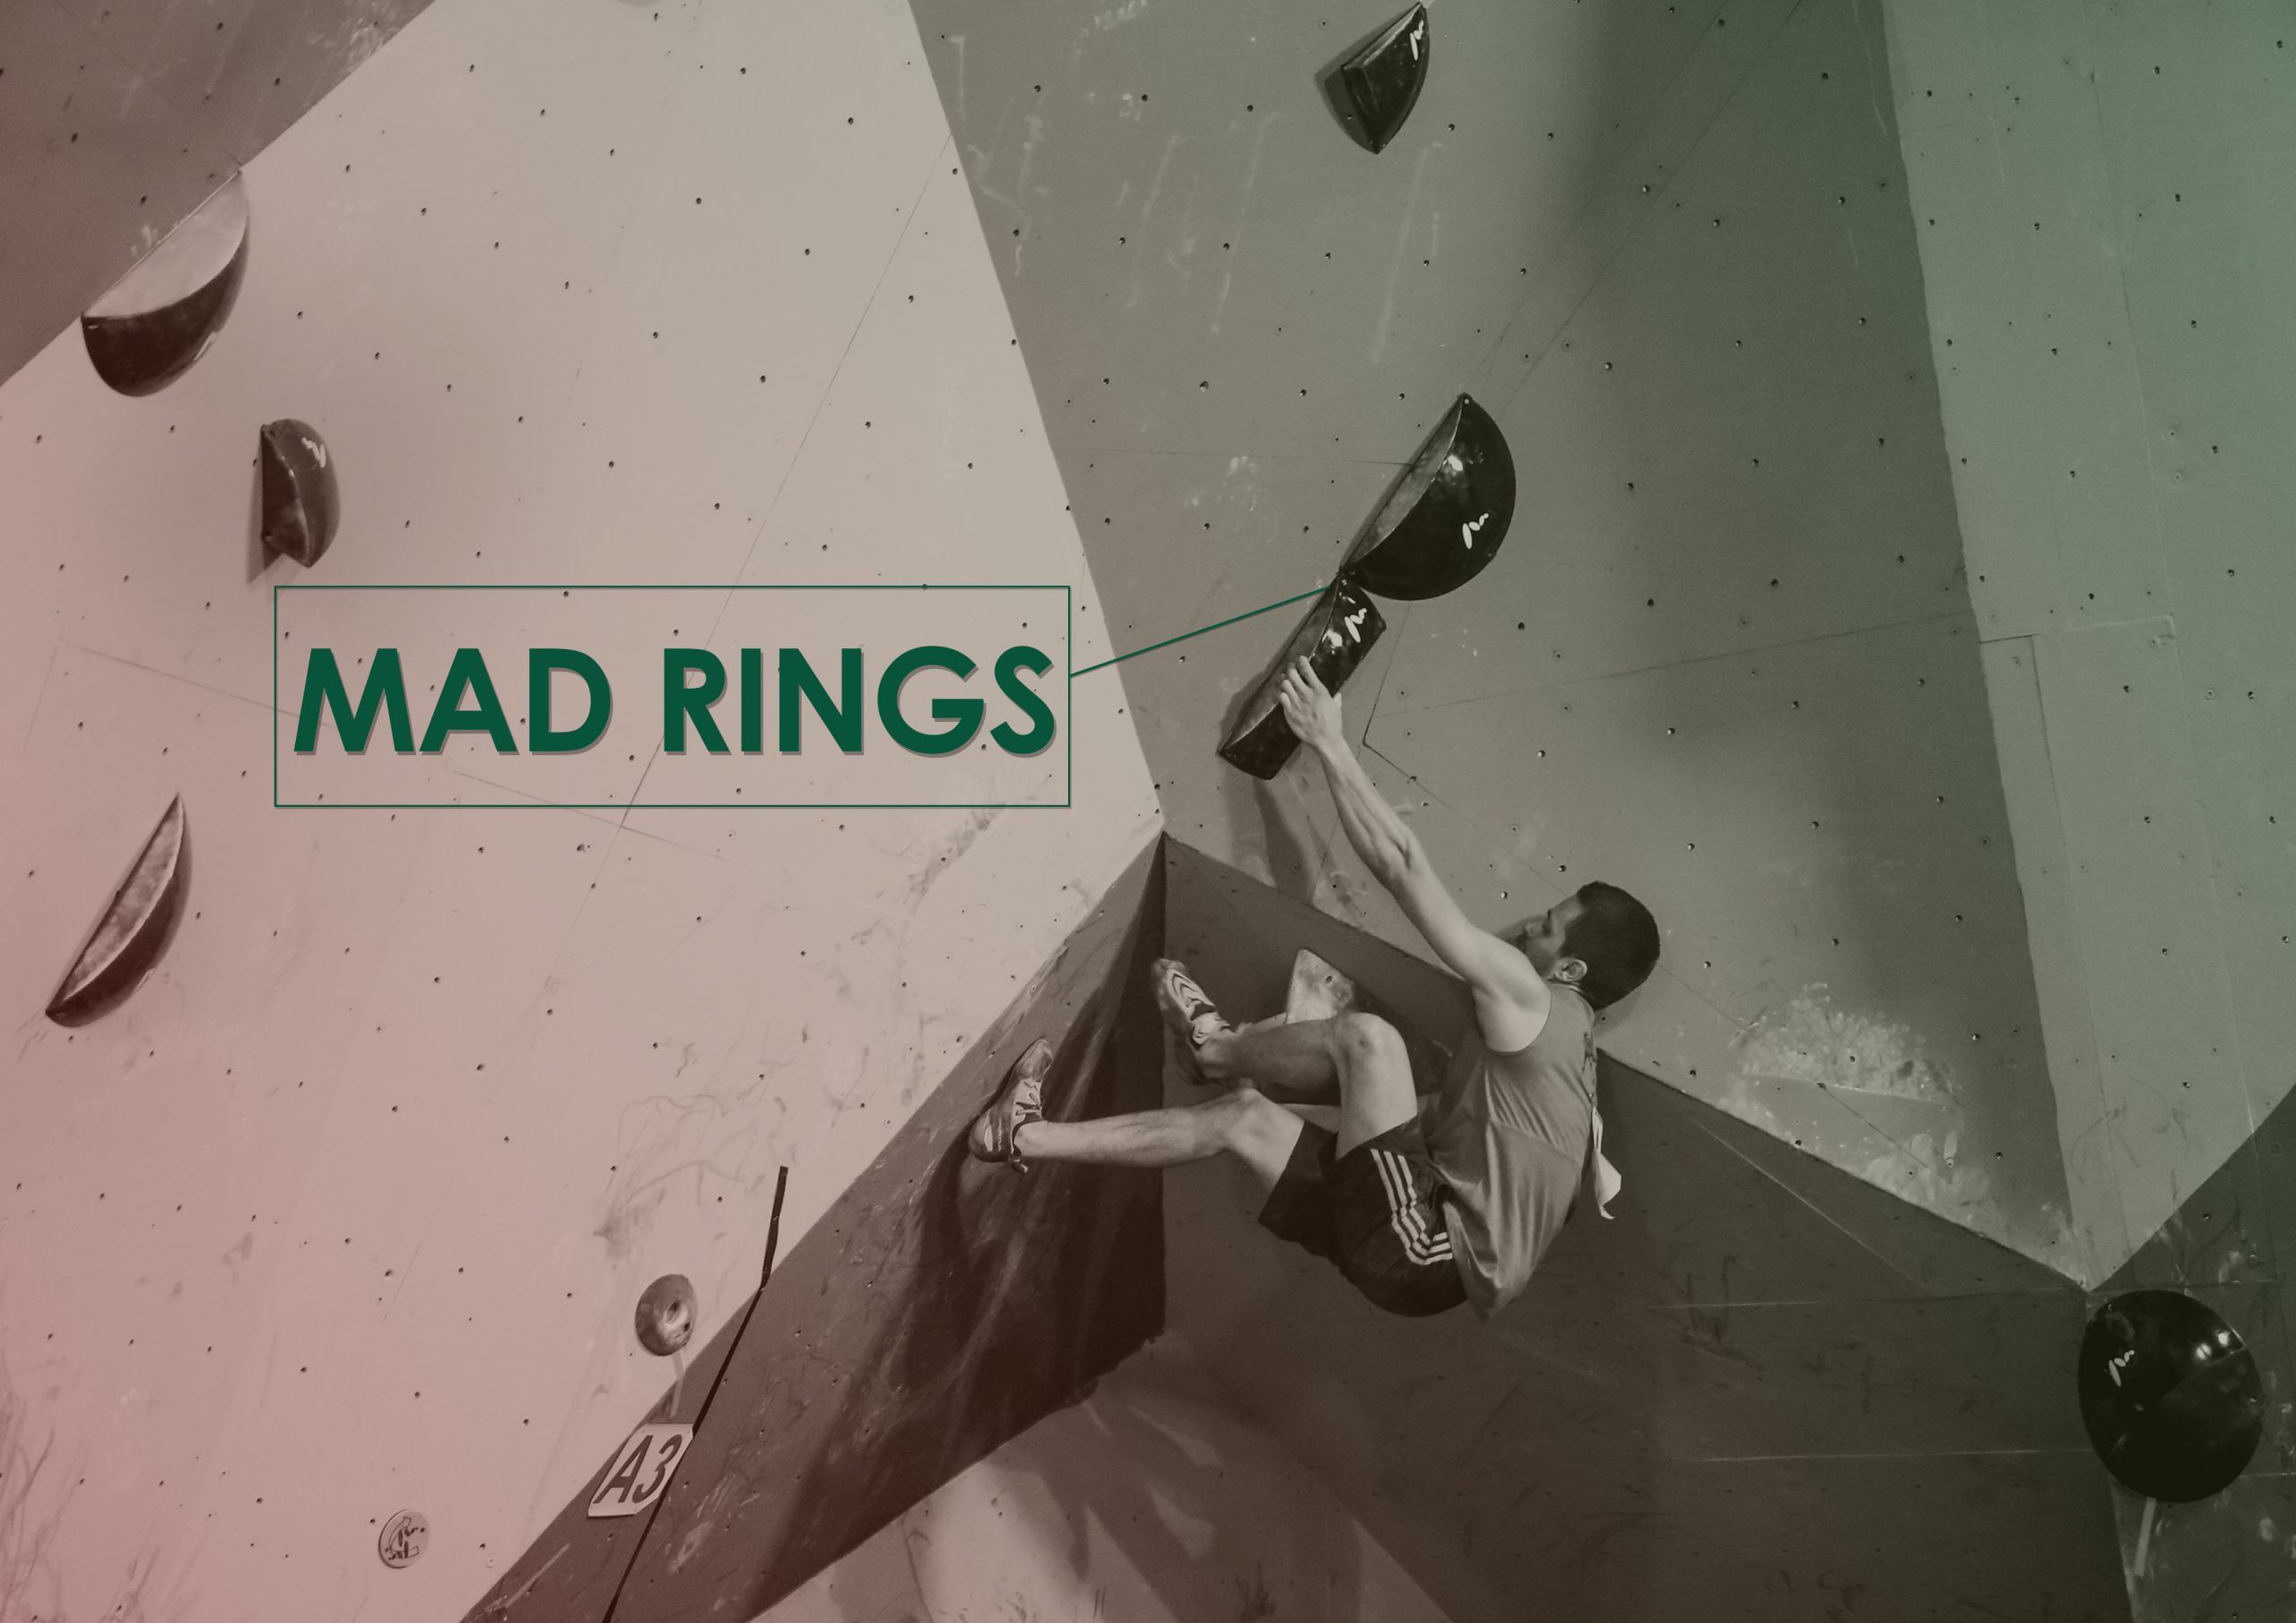 MAD RINGS